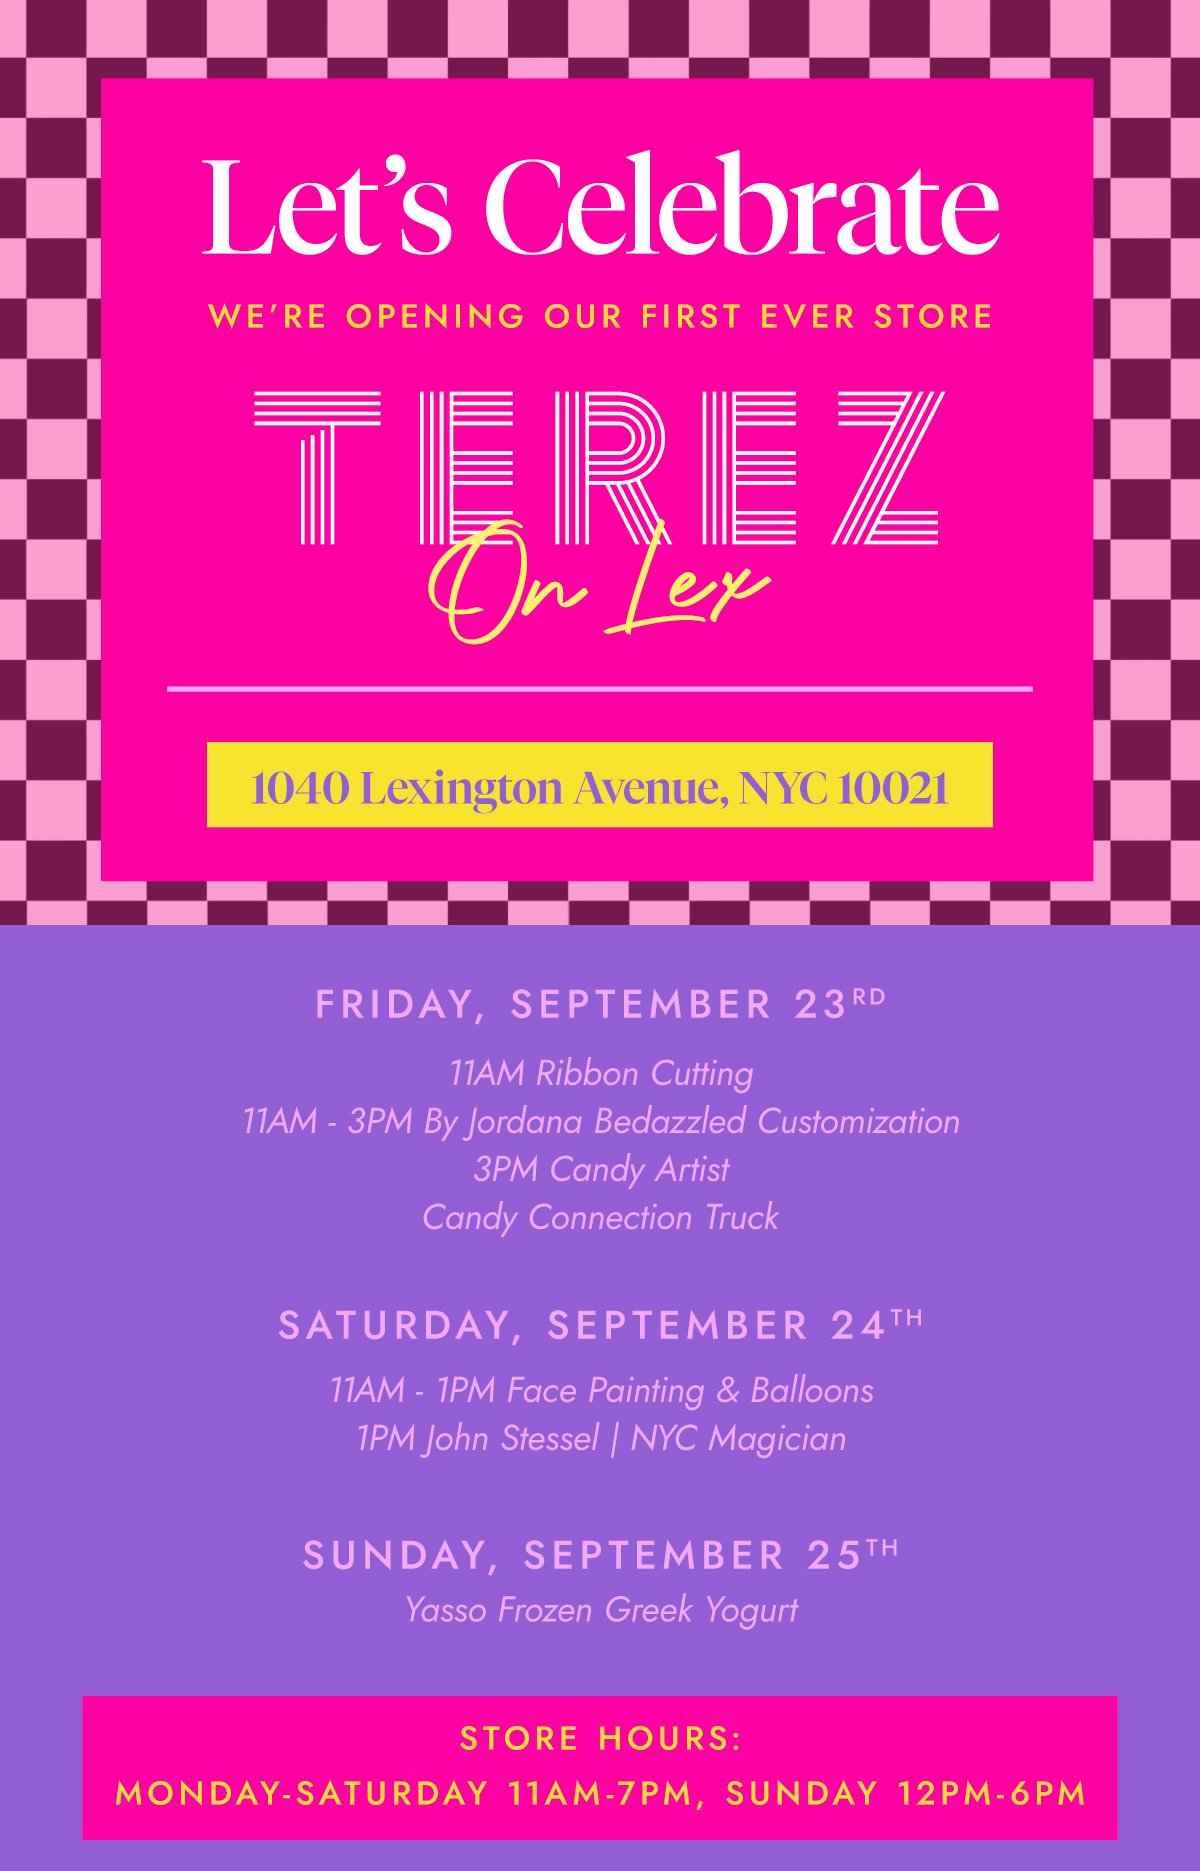 Terez and MLB launch a collaboration perfect for summer - Good